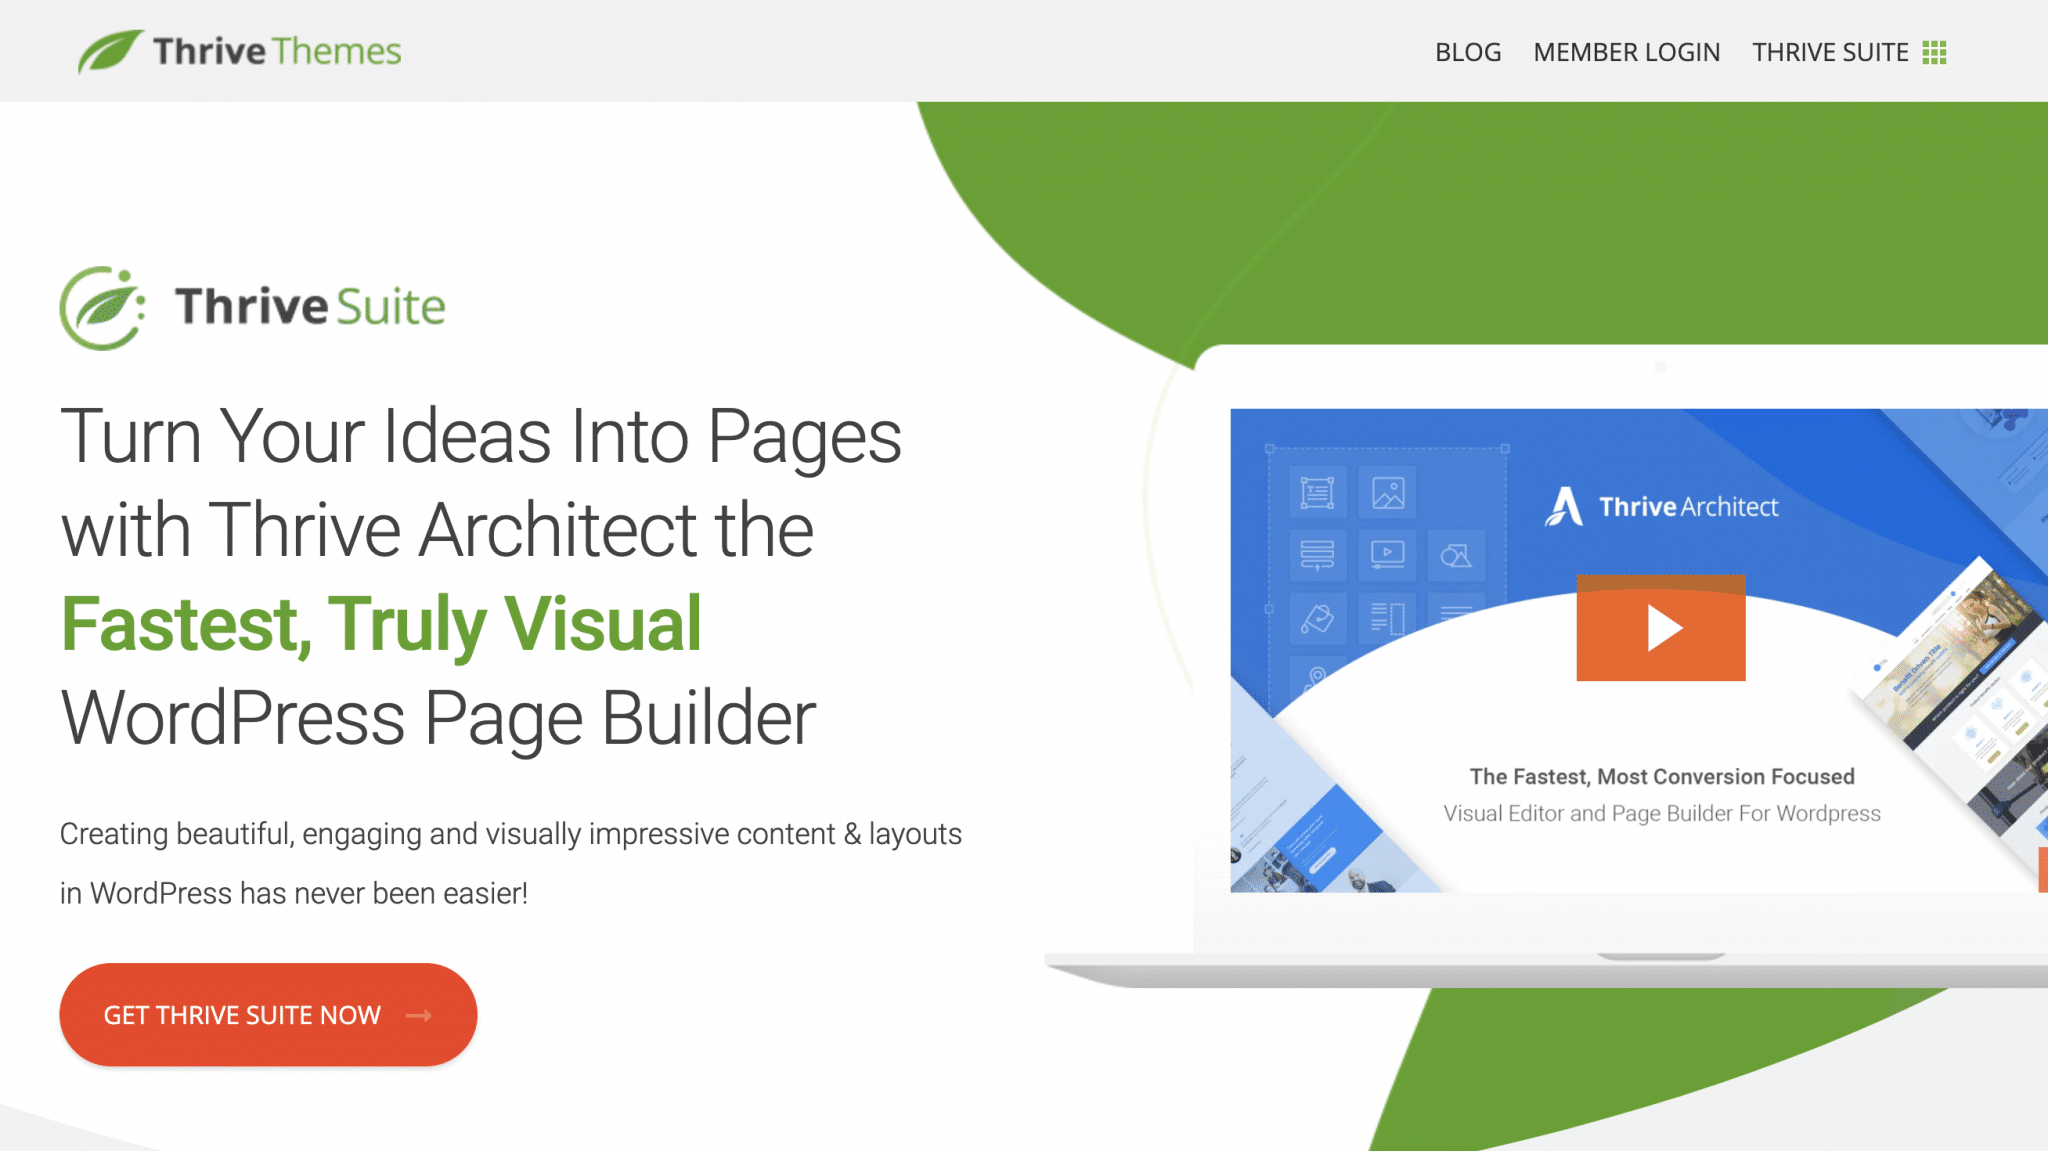 Thrive Architect, the WordPress page builder part of the Thrive Suite, to build landing pages.